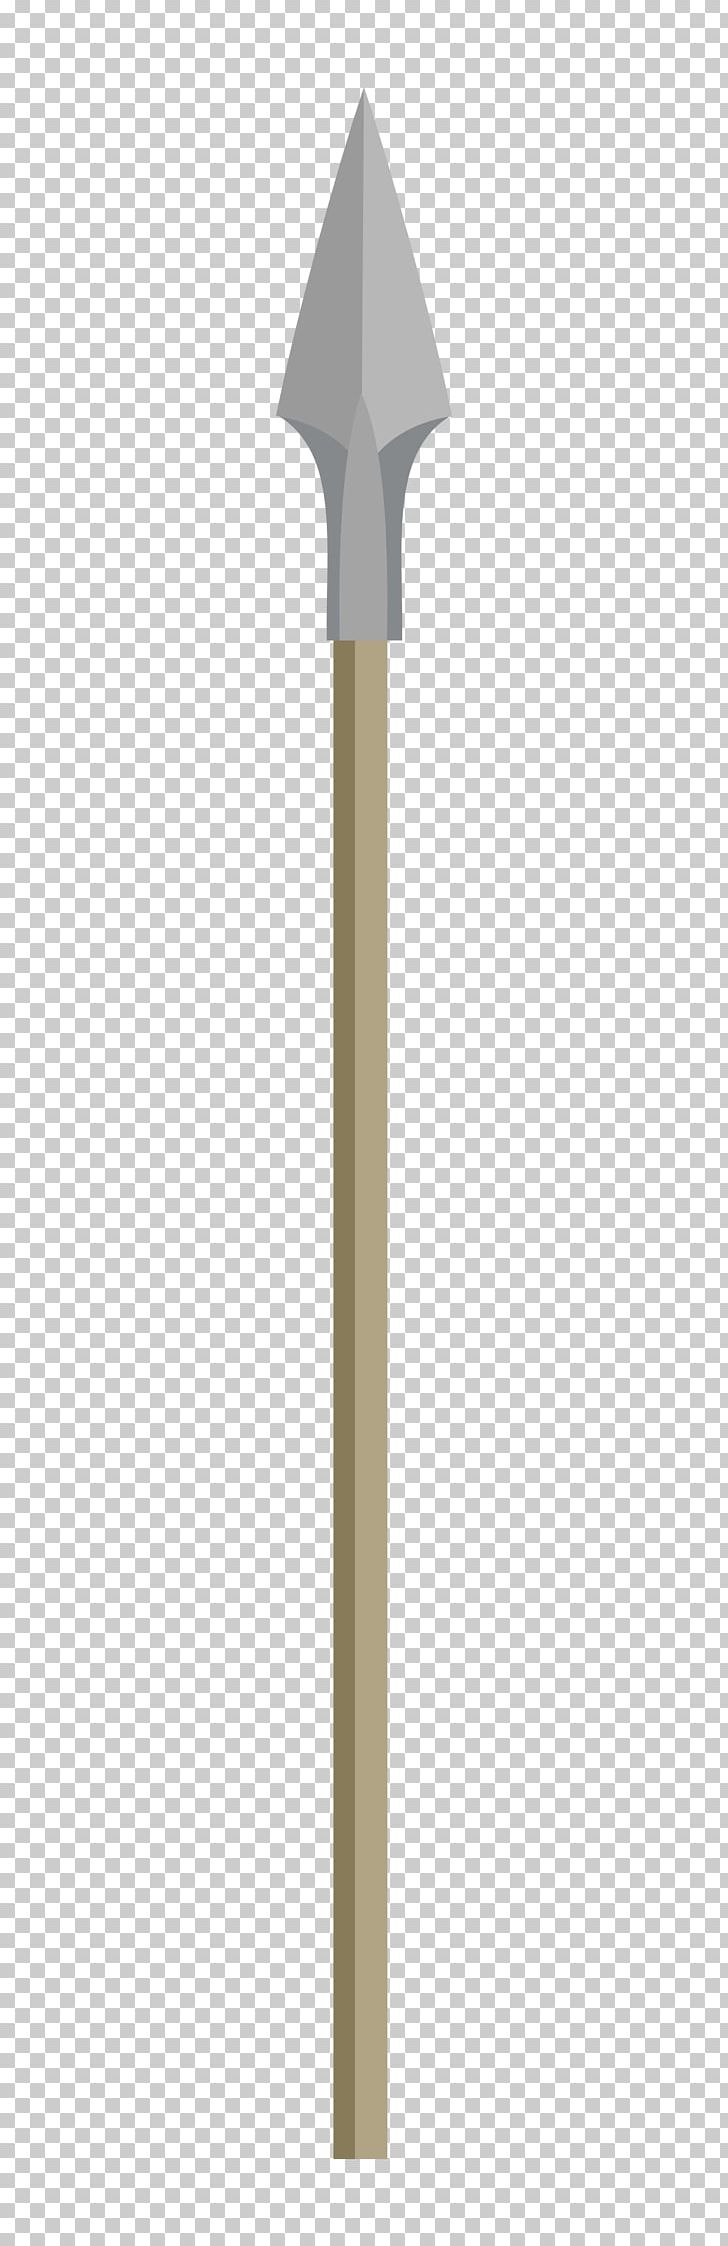 Spear PNG, Clipart, Spear Free PNG Download